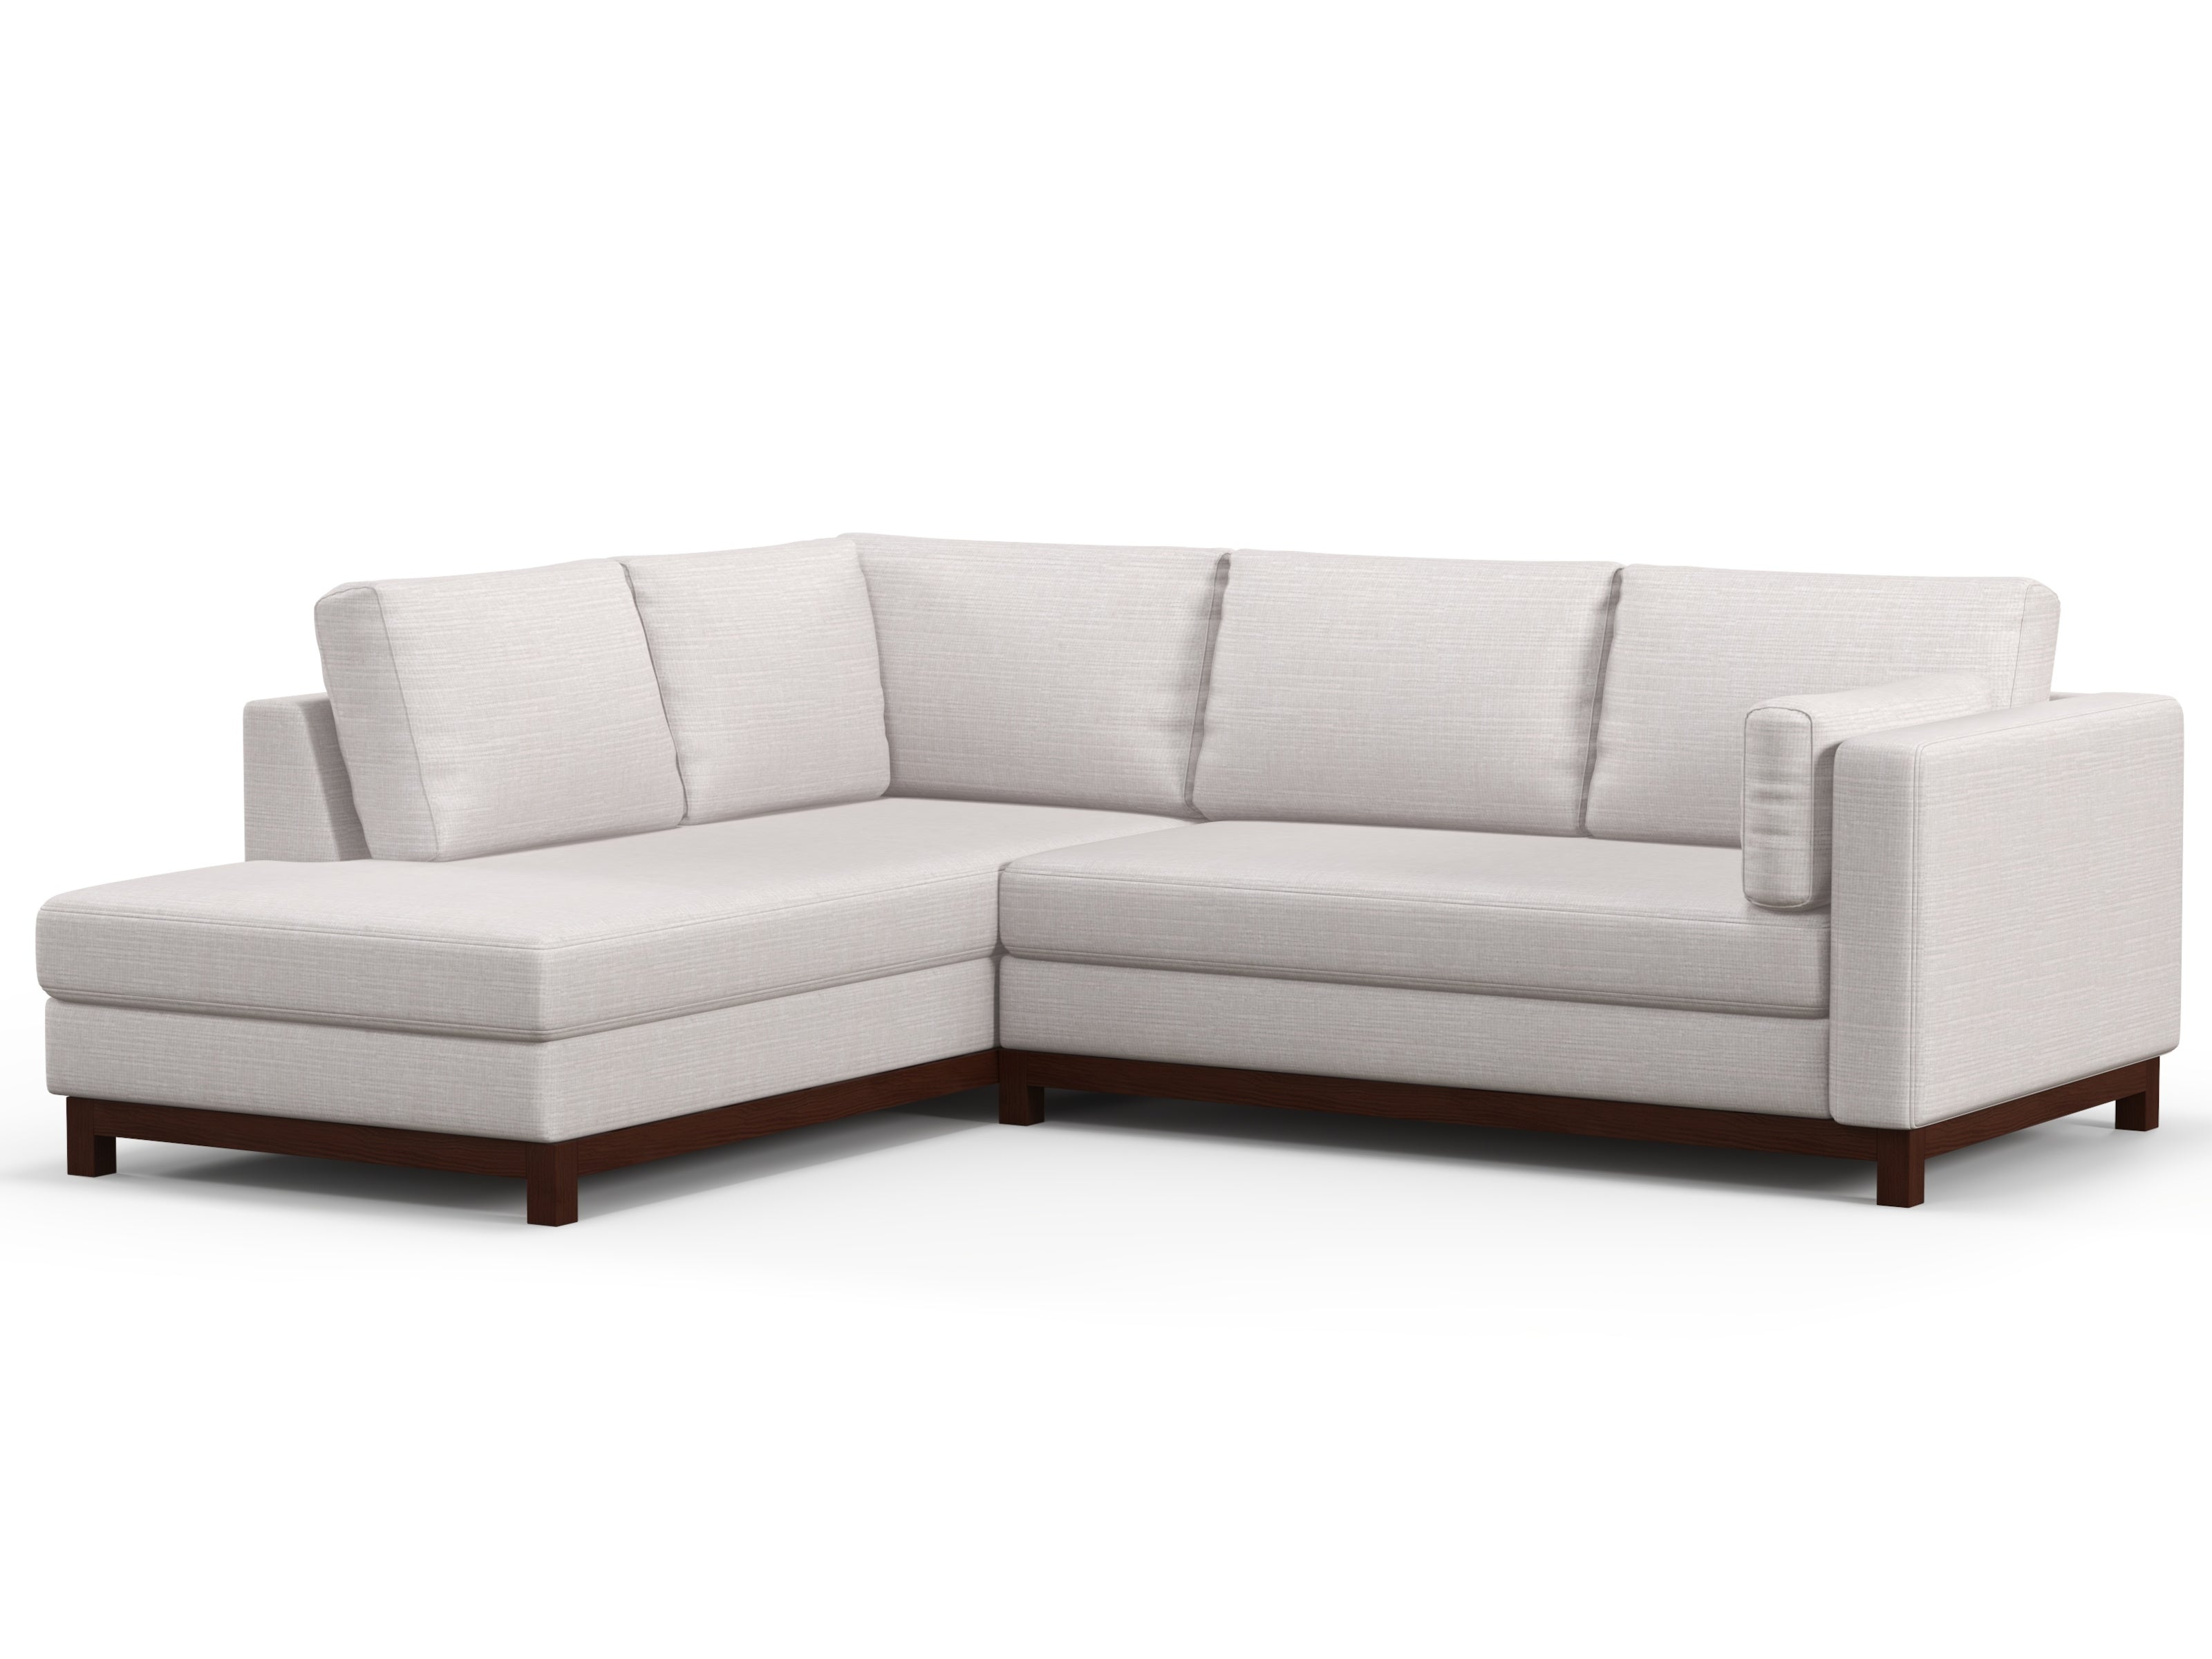 Florida Bumper Chaise Sectional - What A Room